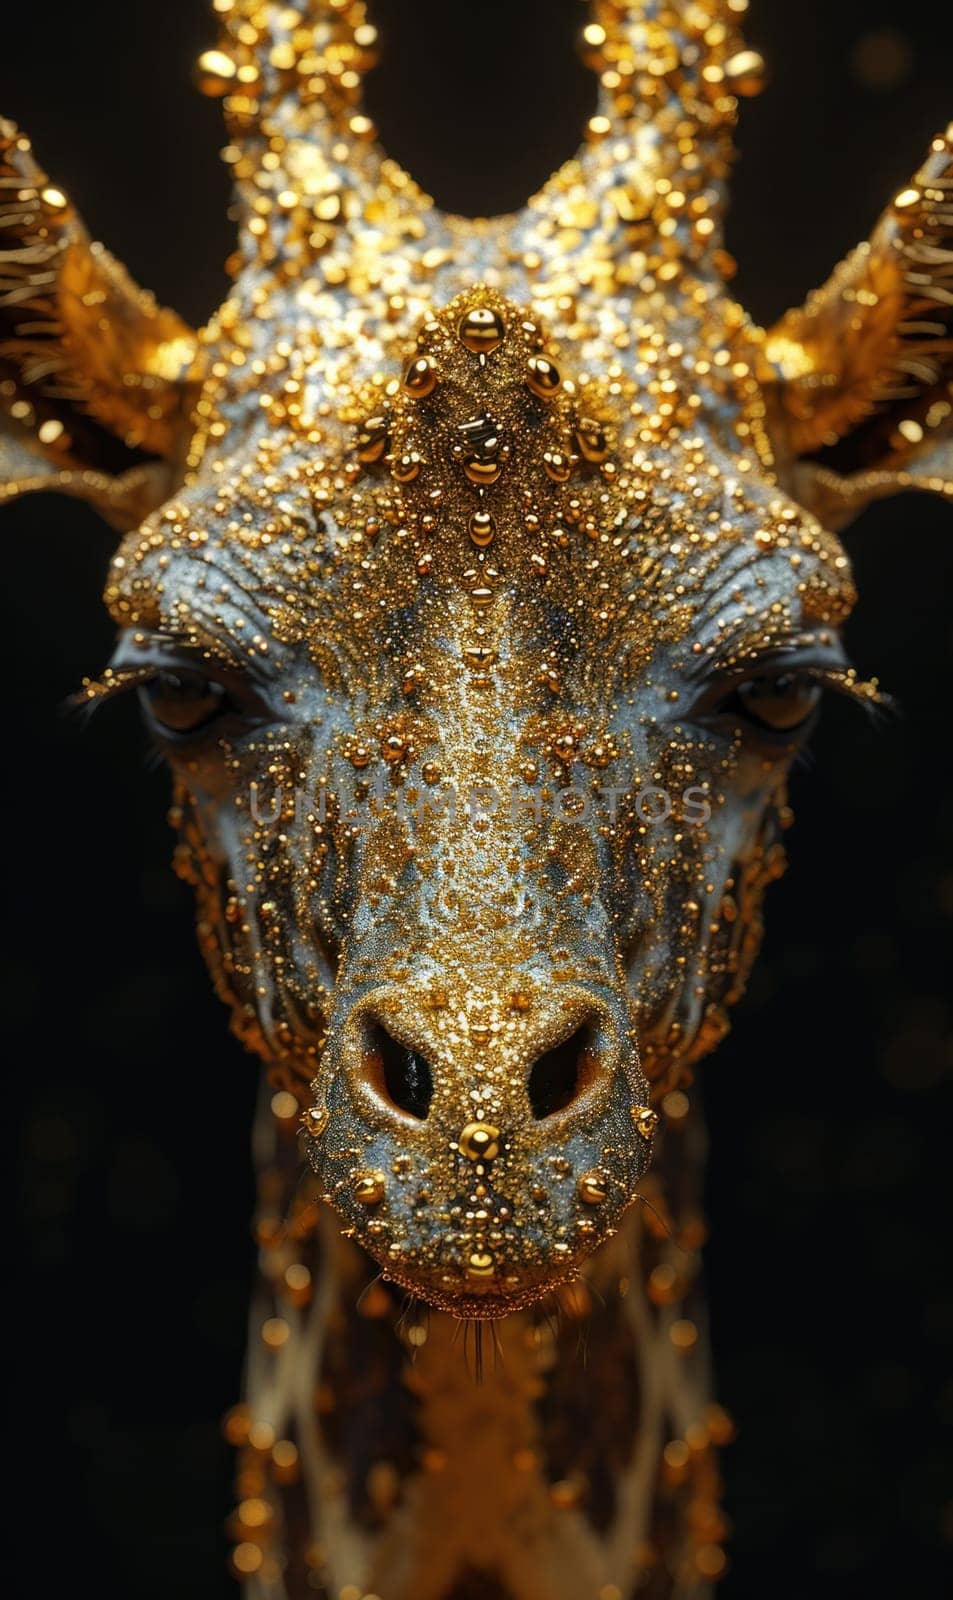 A close up of a giraffe with gold and silver decorations